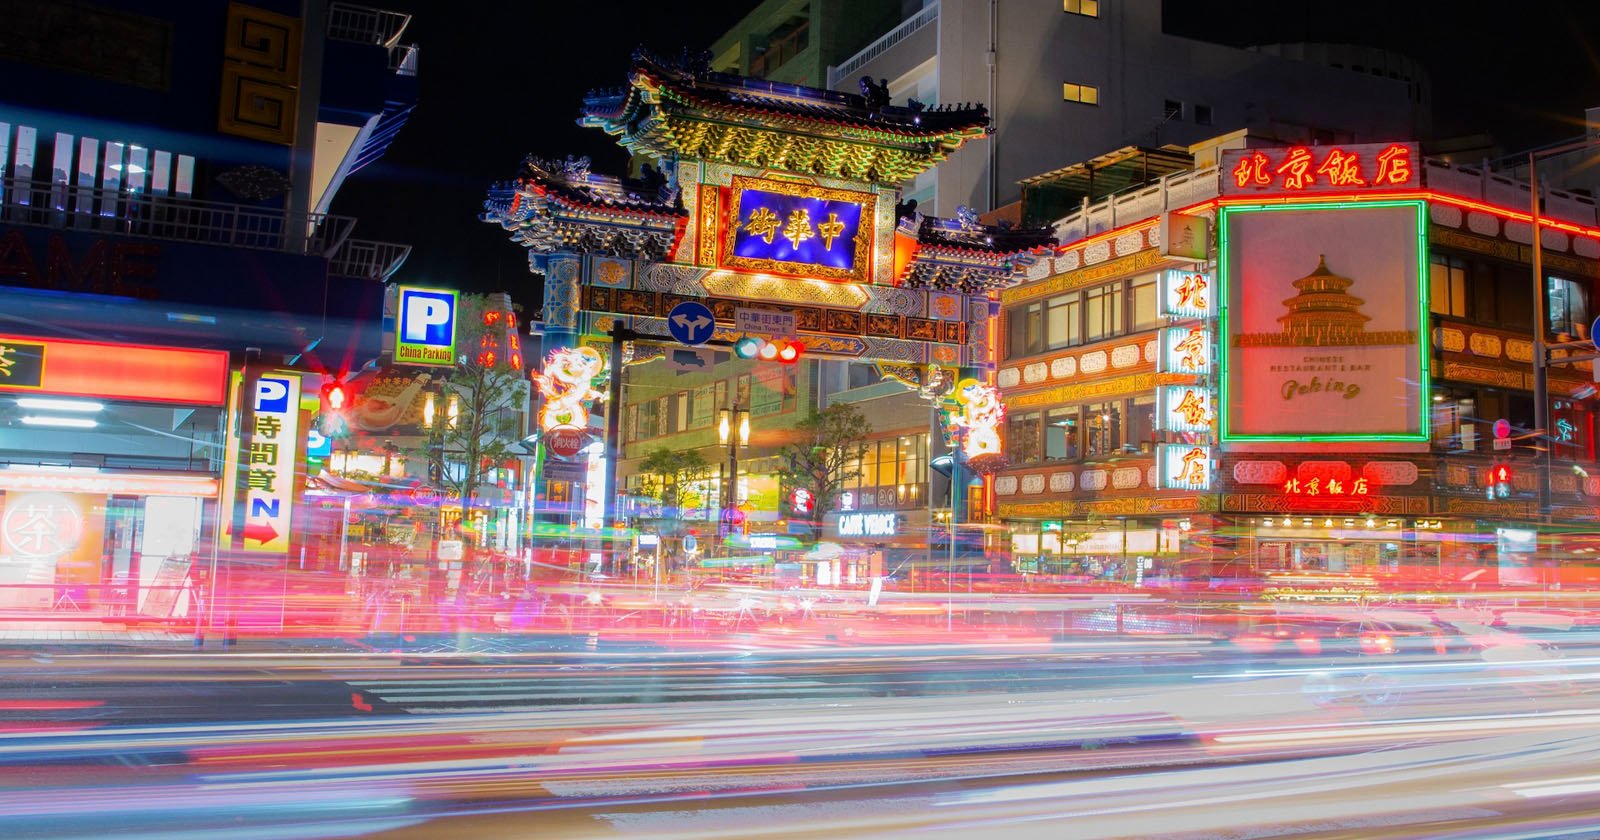 Dreamy Timelapse Puts the Nighttime Streets of Japan Front and Center